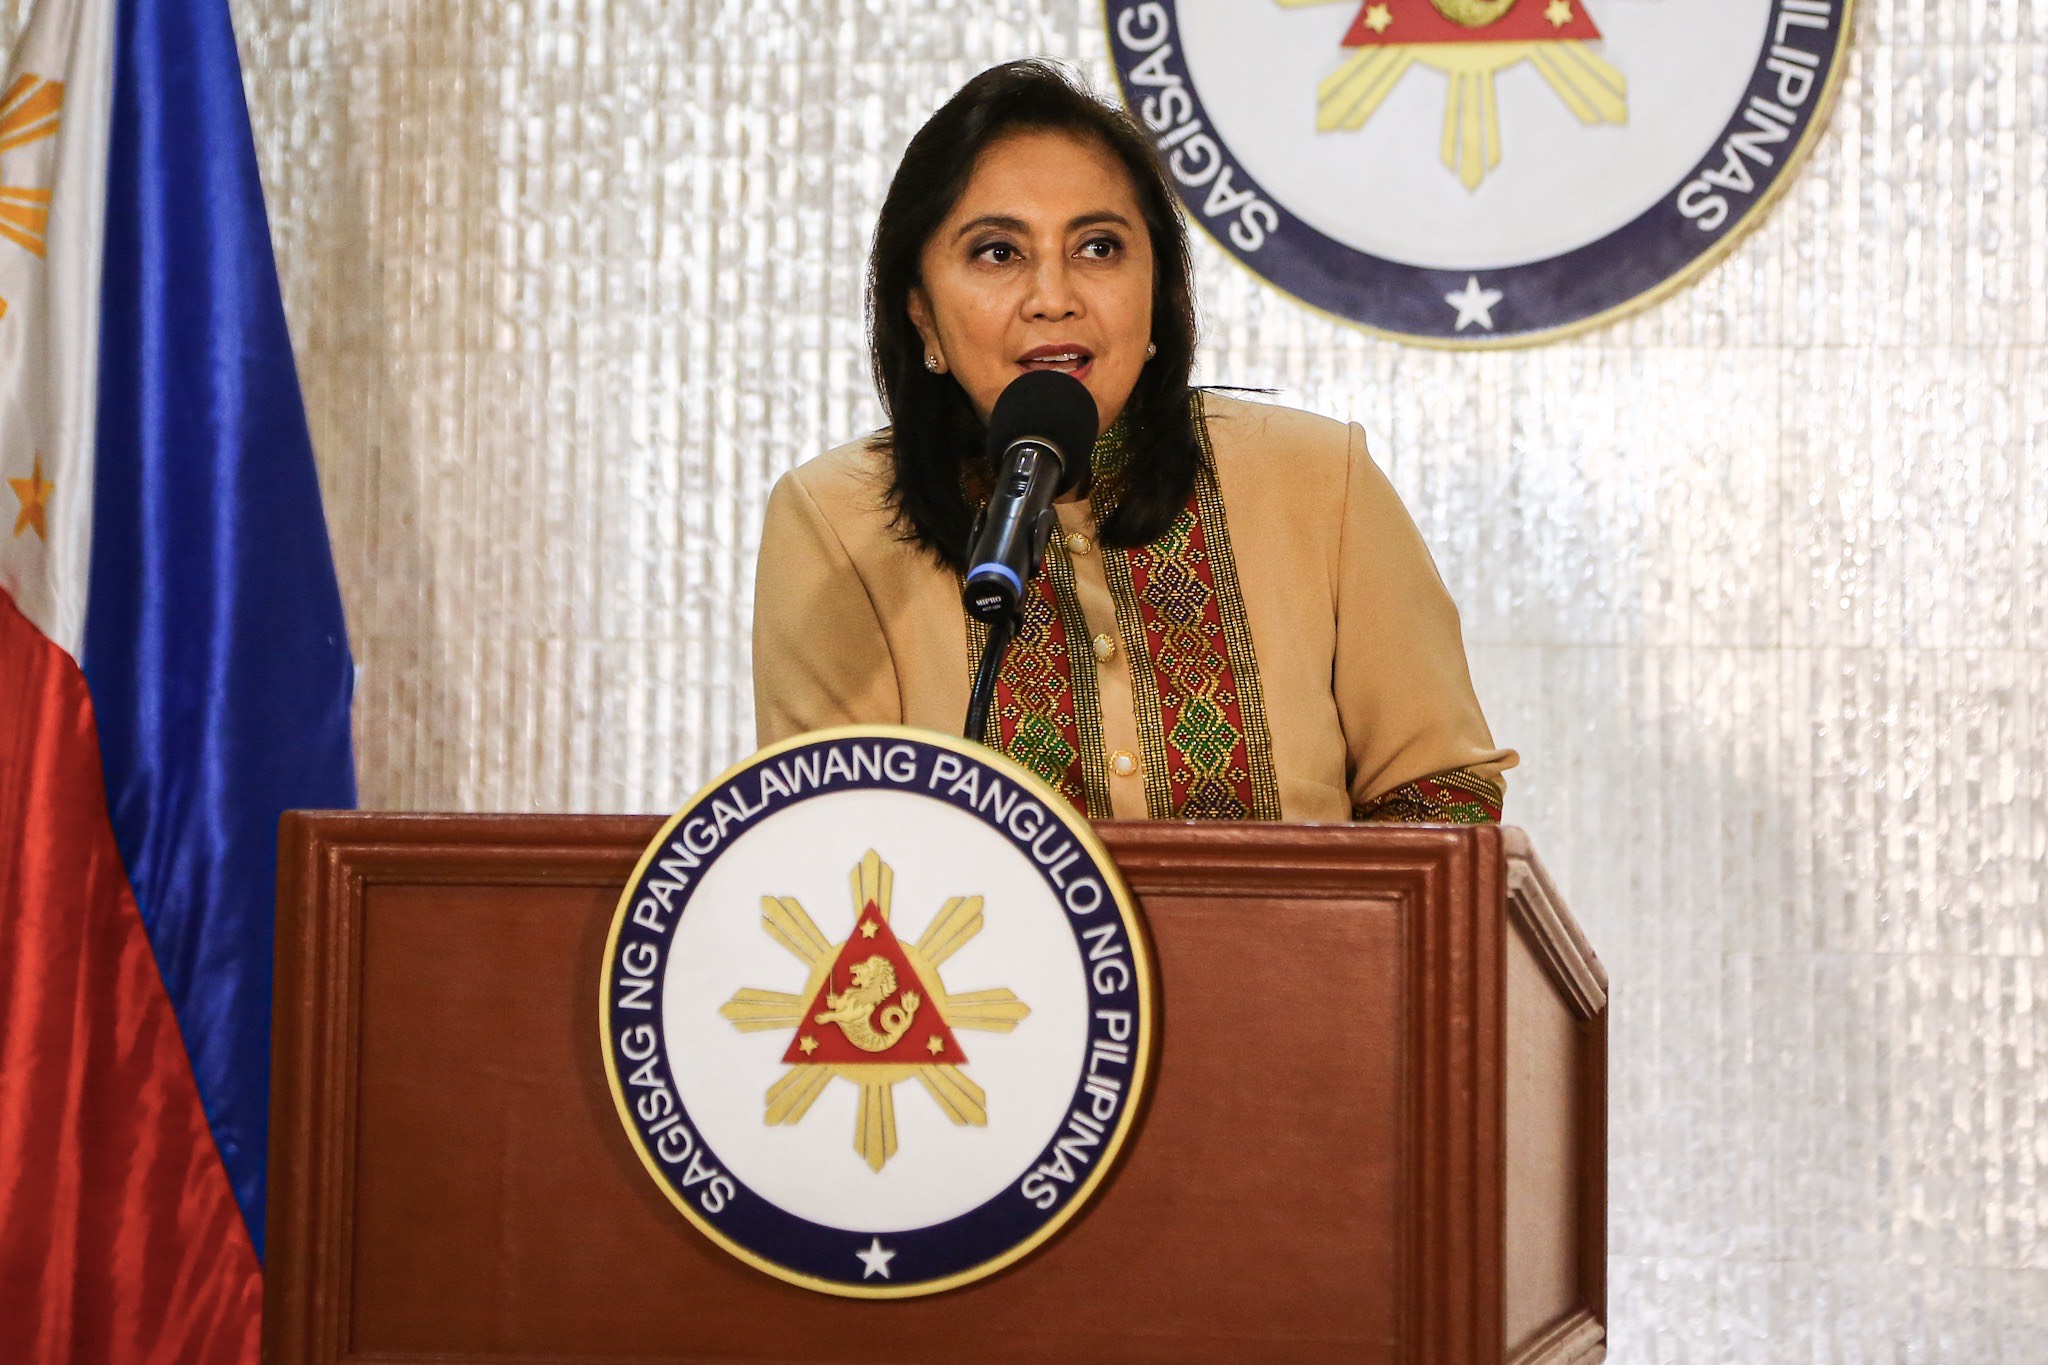 'ARE YOU READY FOR ME?' Vice President Leni Robredo says she will remain critical of President Rodrigo Duterte's bloody war on drugs. Photo by Jire Carreon/Rappler